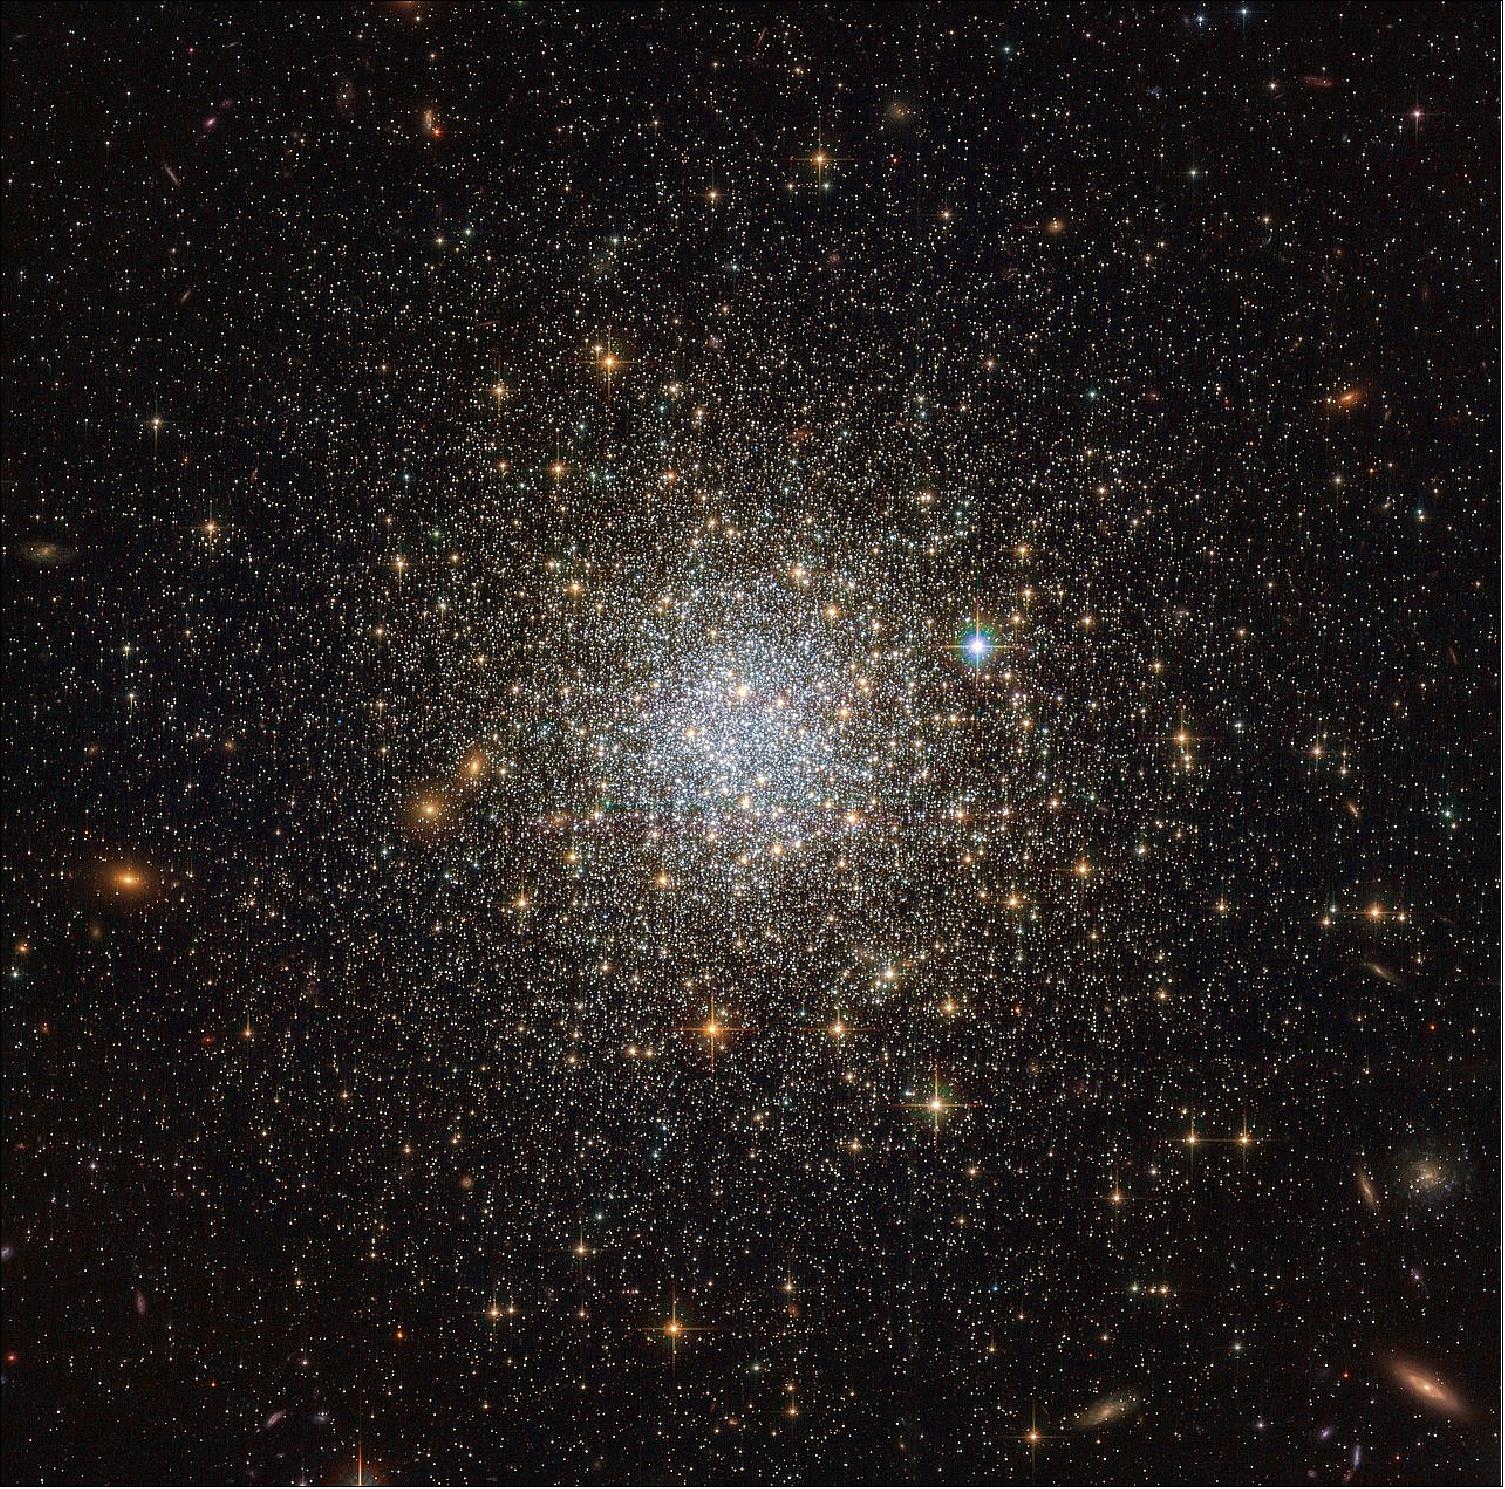 Figure 28: Just as people of the same age can vary greatly in appearance and shape, so do collections of stars or stellar aggregates. New observations from the NASA/ESA Hubble Space Telescope suggest that chronological age alone does not tell the complete story when it comes to the evolution of star clusters. — This image from the NASA/ESA Hubble Space Telescope reveals an ancient, glimmering ball of stars called NGC 1466. It is a globular cluster — a gathering of stars all held together by gravity — that is slowly moving through space on the outskirts of the Large Magellanic Cloud, one of our closest galactic neighbors. NGC 1466 certainly is one for extremes. It has a mass equivalent to roughly 140,000 Suns and an age of around 13.1 billion years, making it almost as old as the Universe itself. This fossil-like relic from the early Universe lies some 160,000 light-years away from us. NGC 1466 is one of the 5 clusters in the LMC in which the level of dynamical evolution (or "dynamical age") was measured (image credit: ESA/Hubble & NASA)